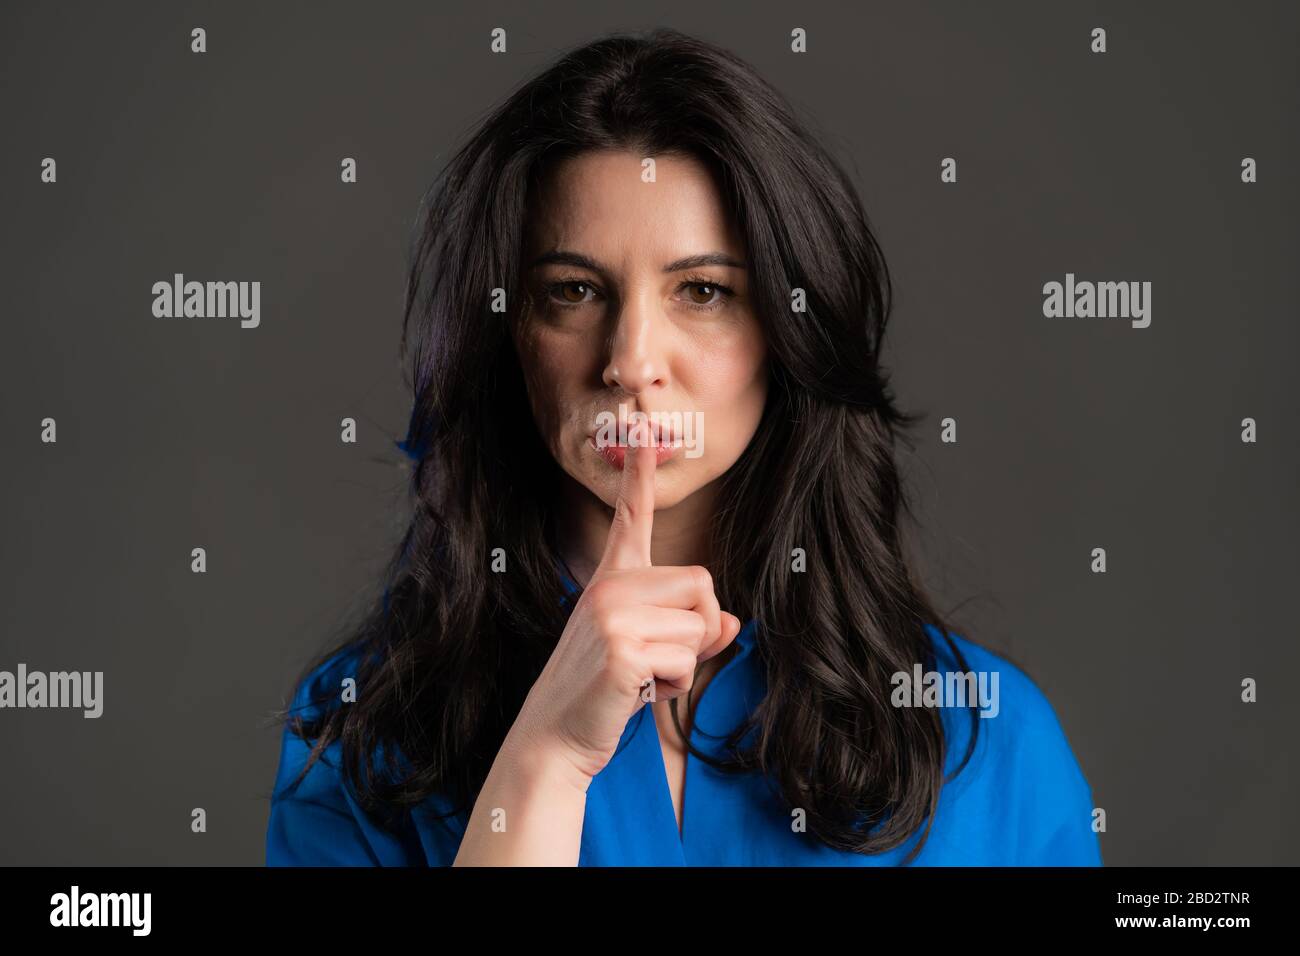 Serious woman with long hair holding finger on her lips over grey background. Gesture of shhh, secret, silence. Close up. Stock Photo